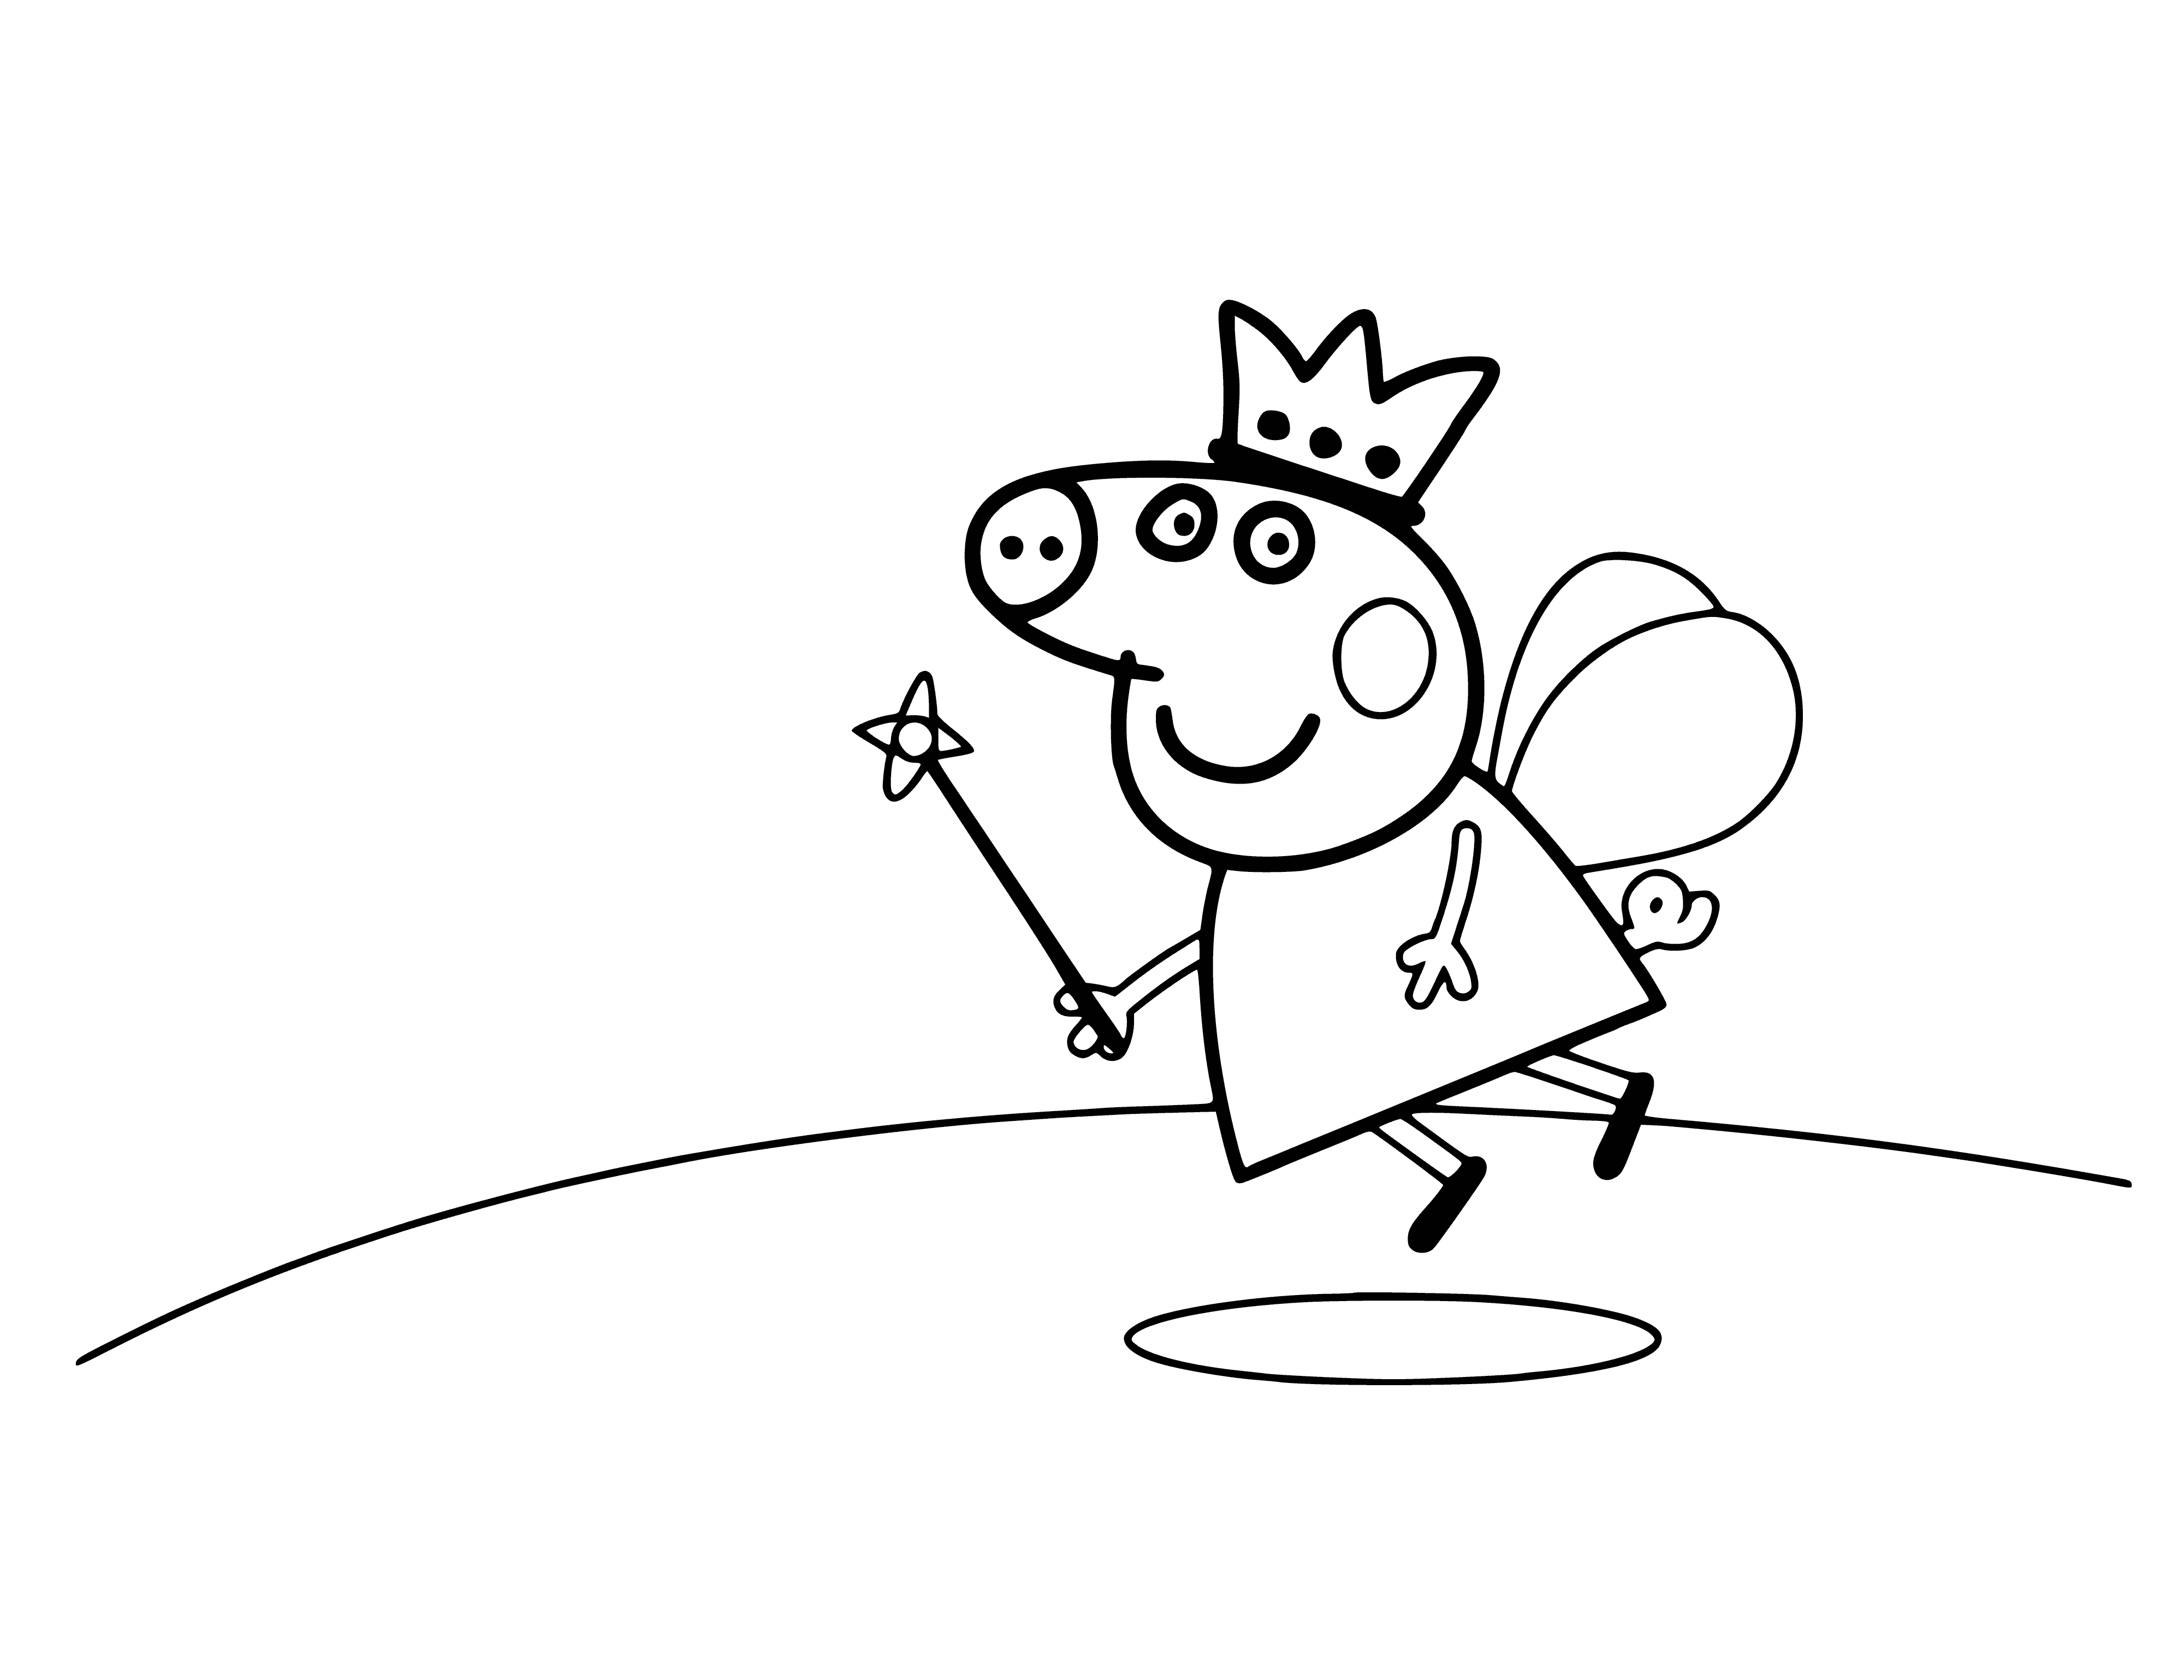 coloring page: Peppa Pig sits on a toadstool in a mushroom field with a wand, wearing a pink dress. A fairy is nearby.